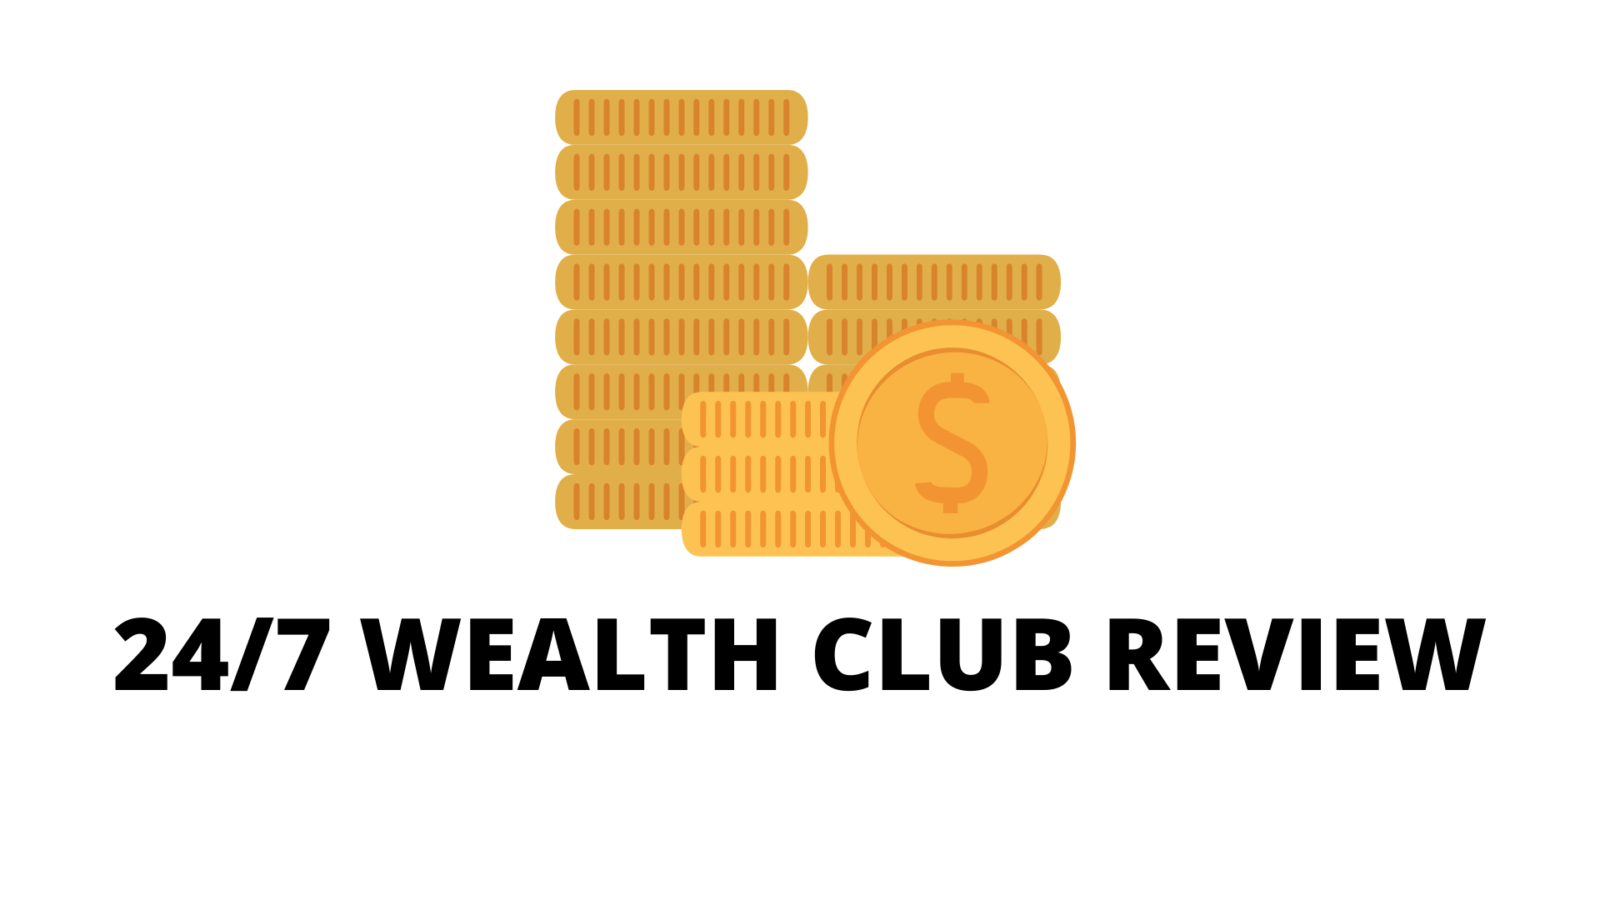 24/7 wealth club review